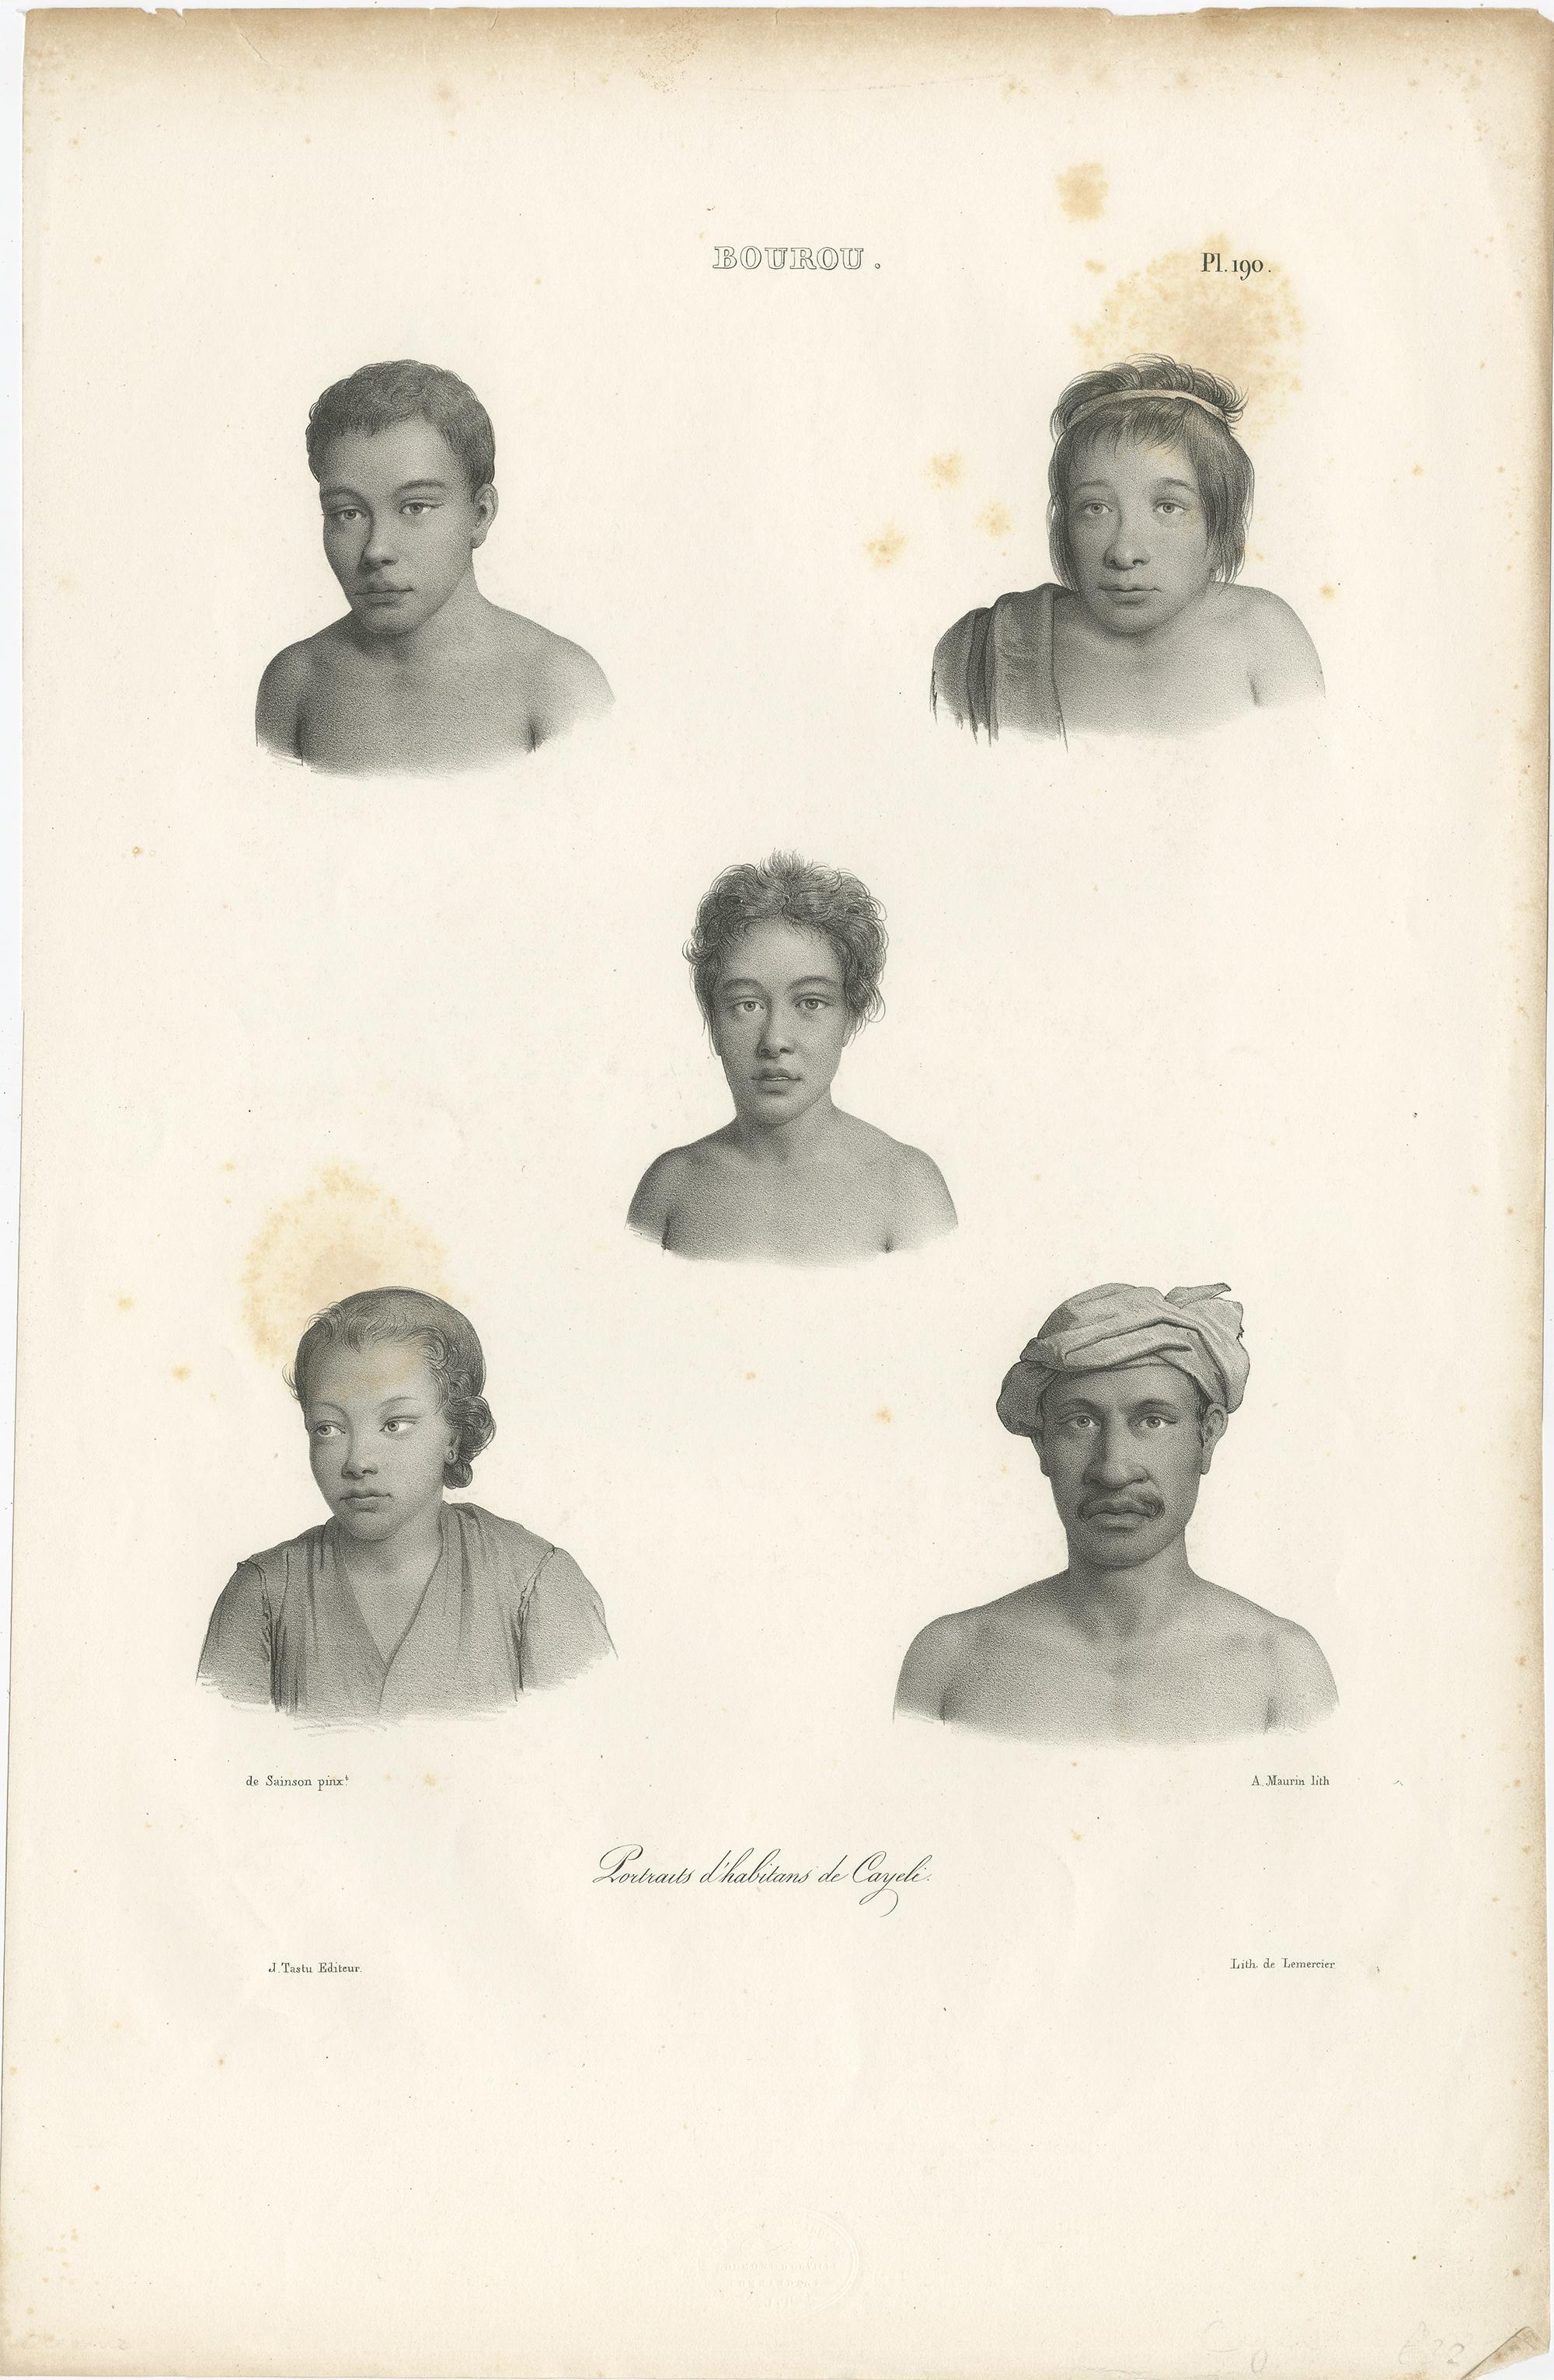 Antique print titled 'Portraits d'Habitans de Cayeli'. Original old lithograph of Kayeli people, an ethnic group mainly living on the southern coast of the Kayeli Gulf of Indonesian island Buru, mainly from the Kaiely Gulf. From an ethnographic